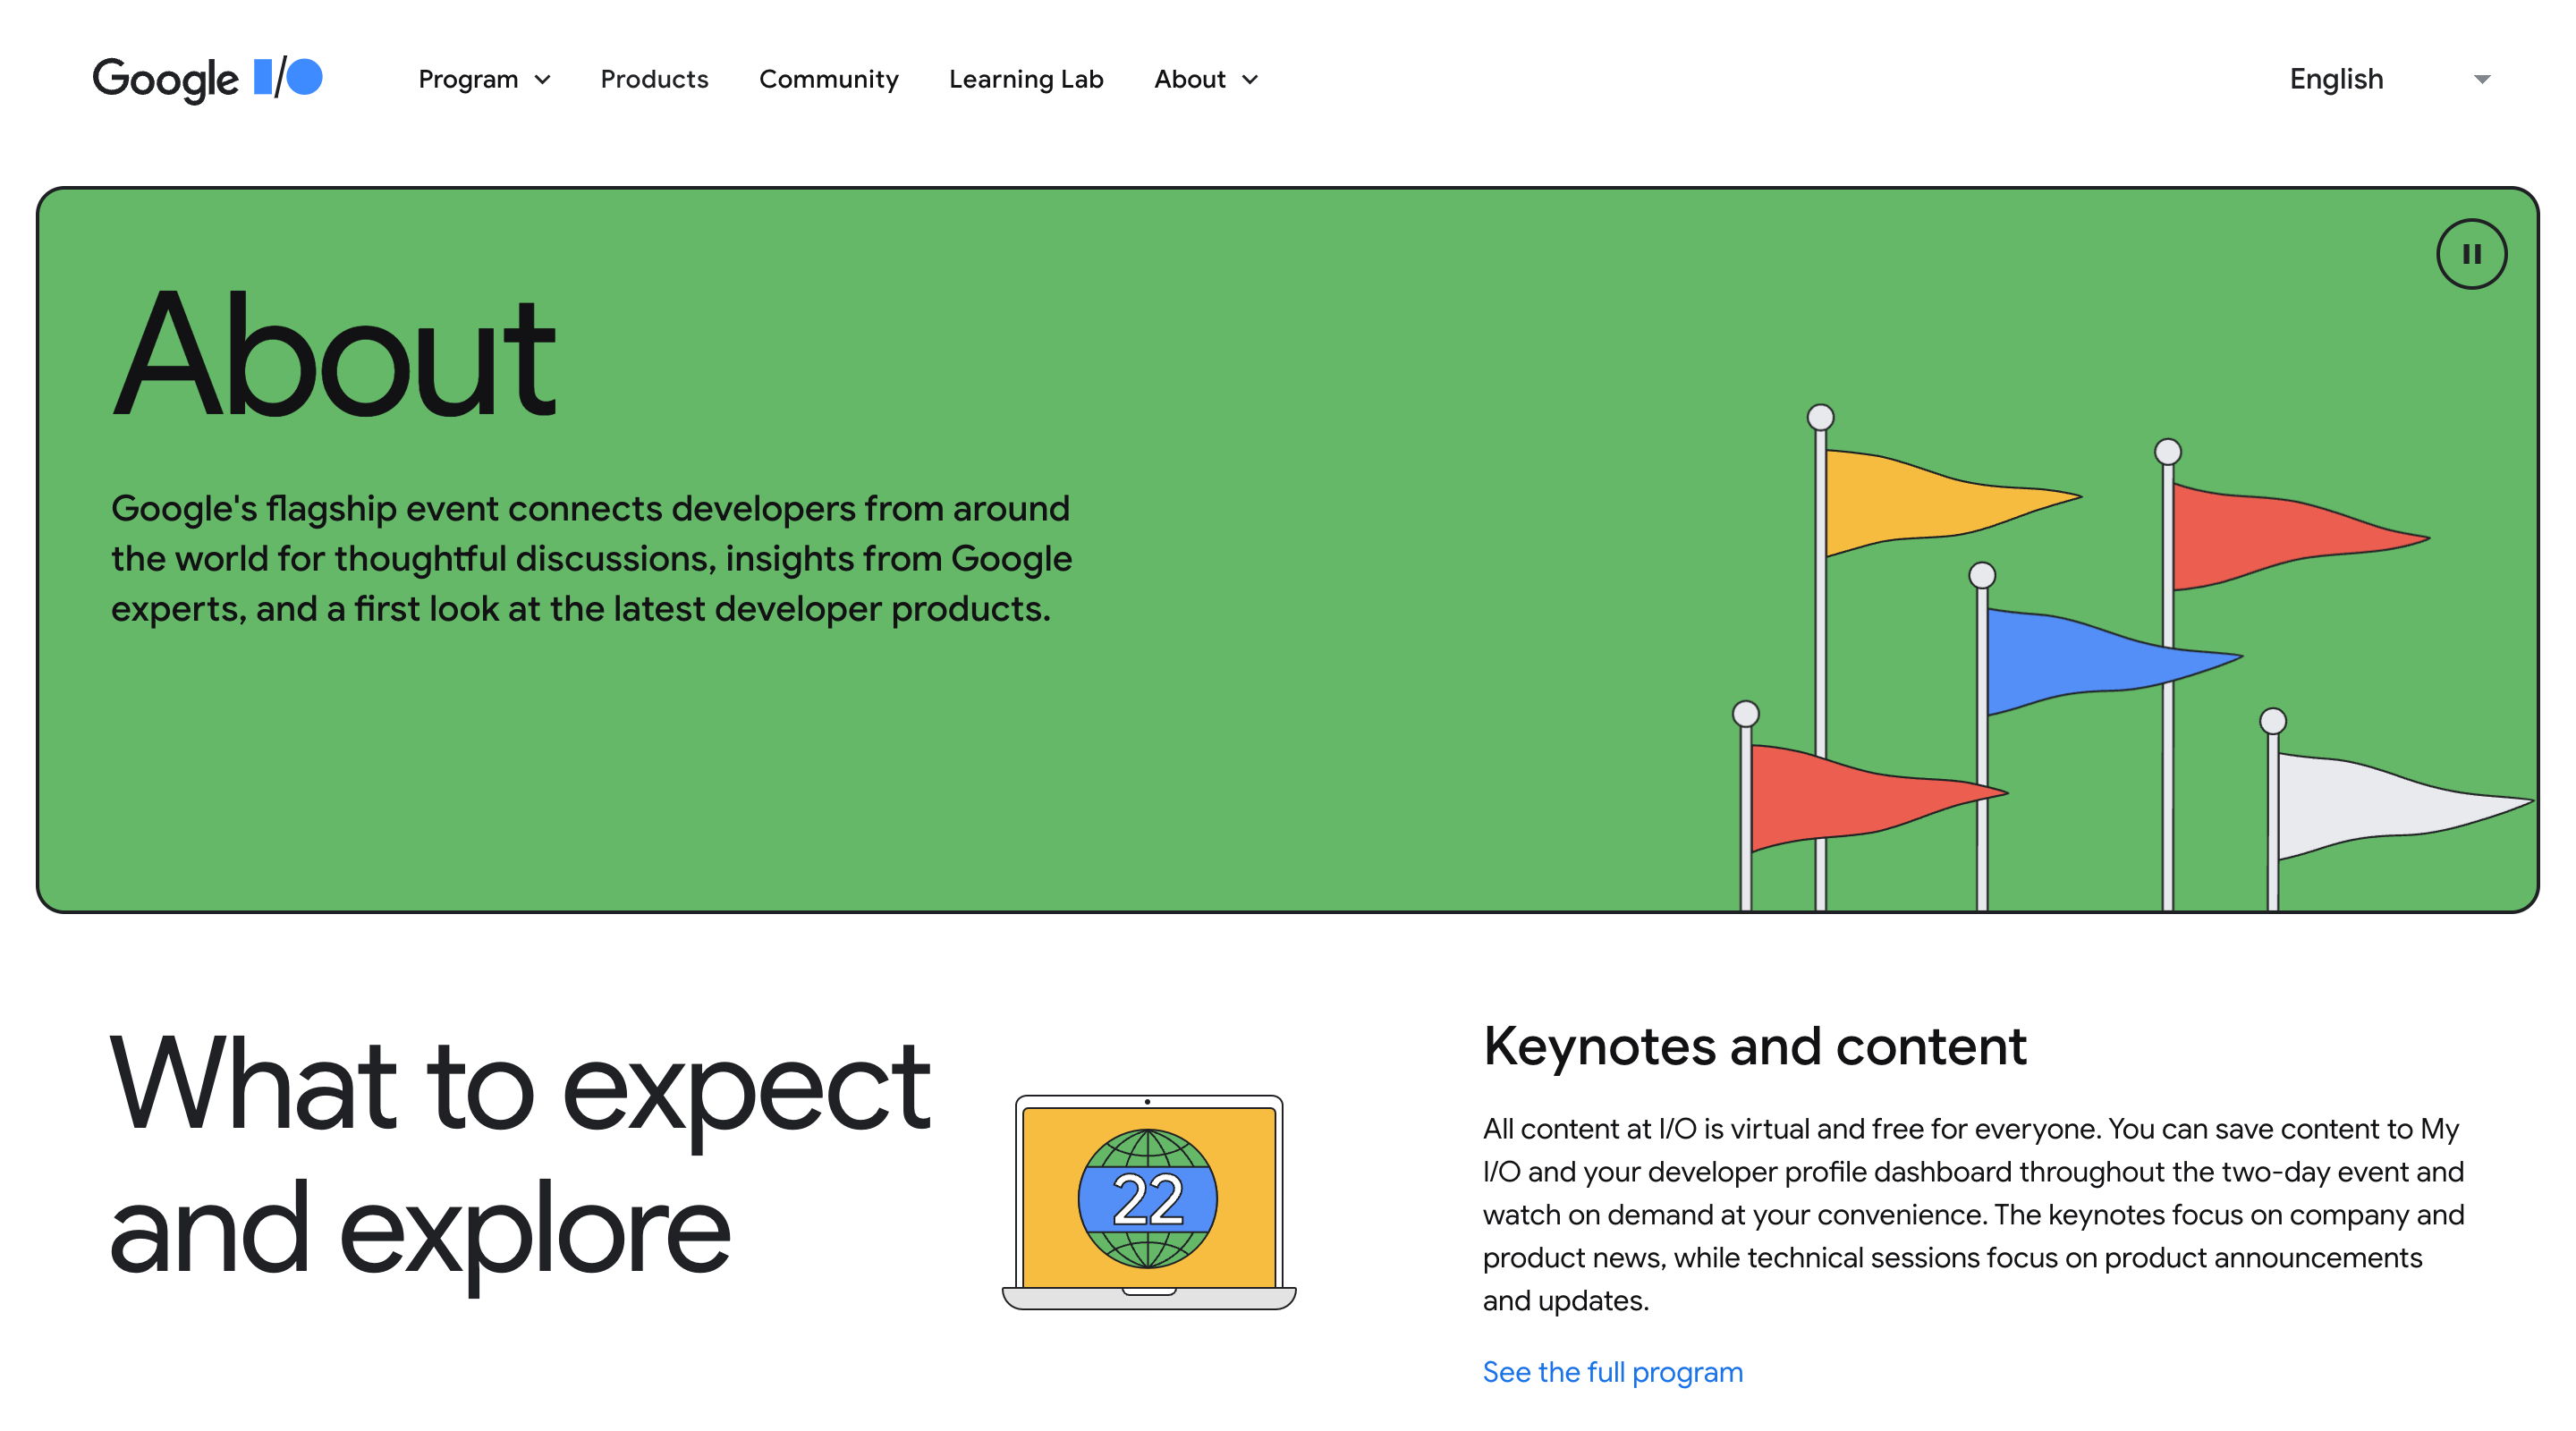 Screenshot of the Google I/O 2022 'About' page. The header contains the Google I/O logo, the main navigation, and a language selector. The hero section contains an introduction paragraph and an illustration of some plain flags blowing in the wind.